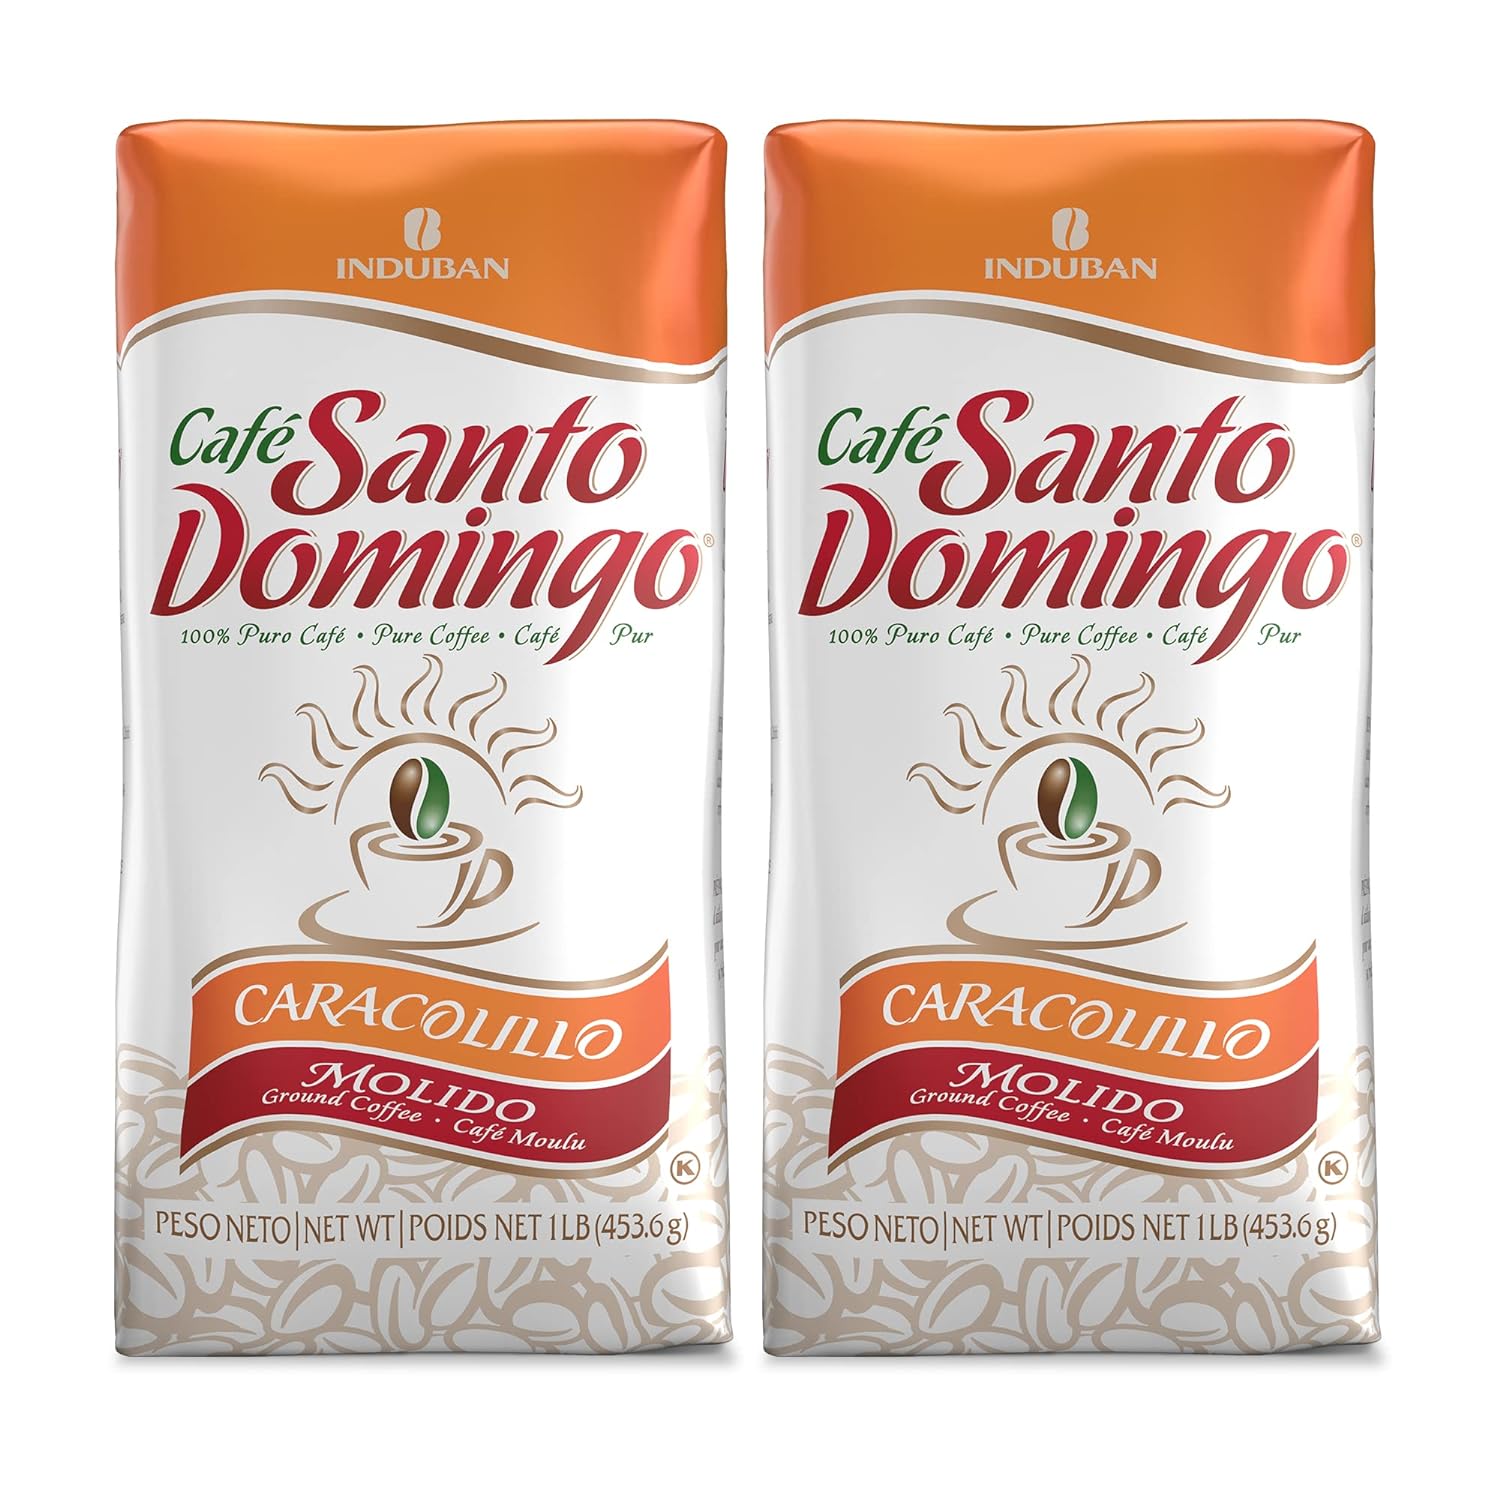 Café Santo Domingo Caracolillo, 16 oz Bag, Ground Peaberry Coffee, Medium Roast - Product from the Dominican Republic (Pack of 2)